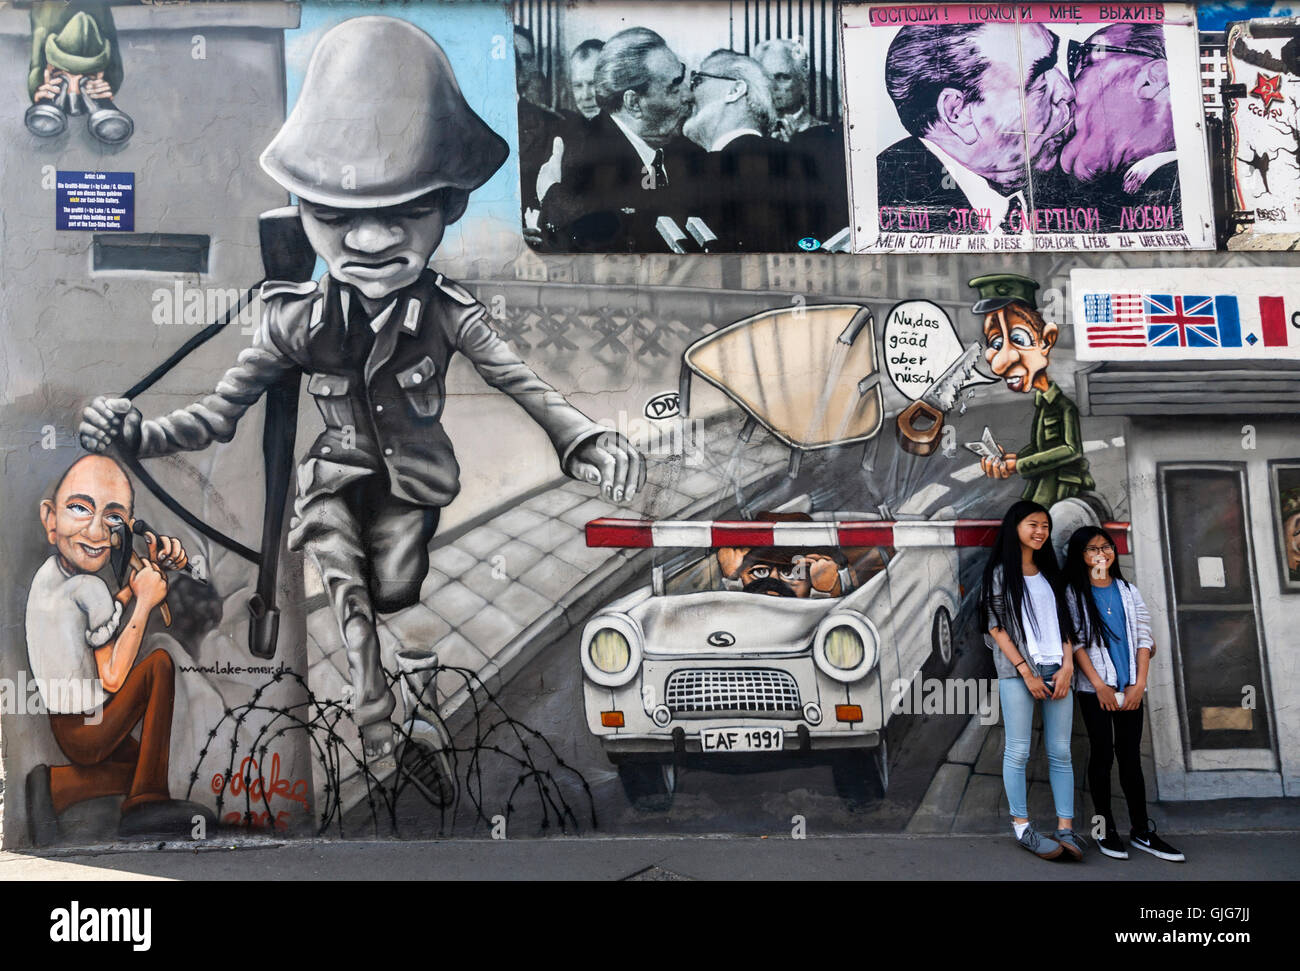 Tourists posing by the mural on the East Side Gallery Store, Friedrichshain, Berlin, Germany. Stock Photo